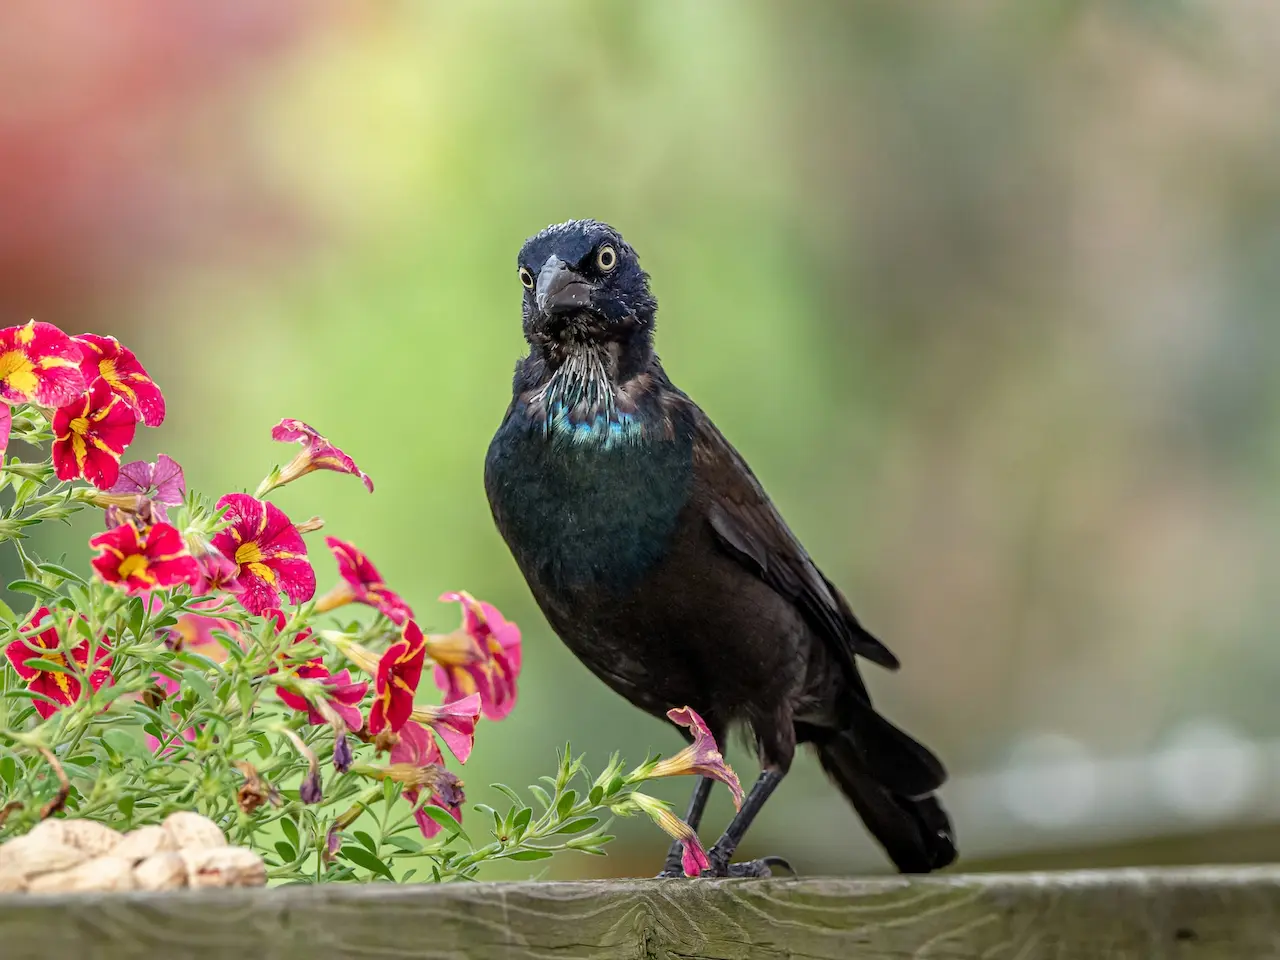 The Boat-tailed Grackles Beside The Flowers